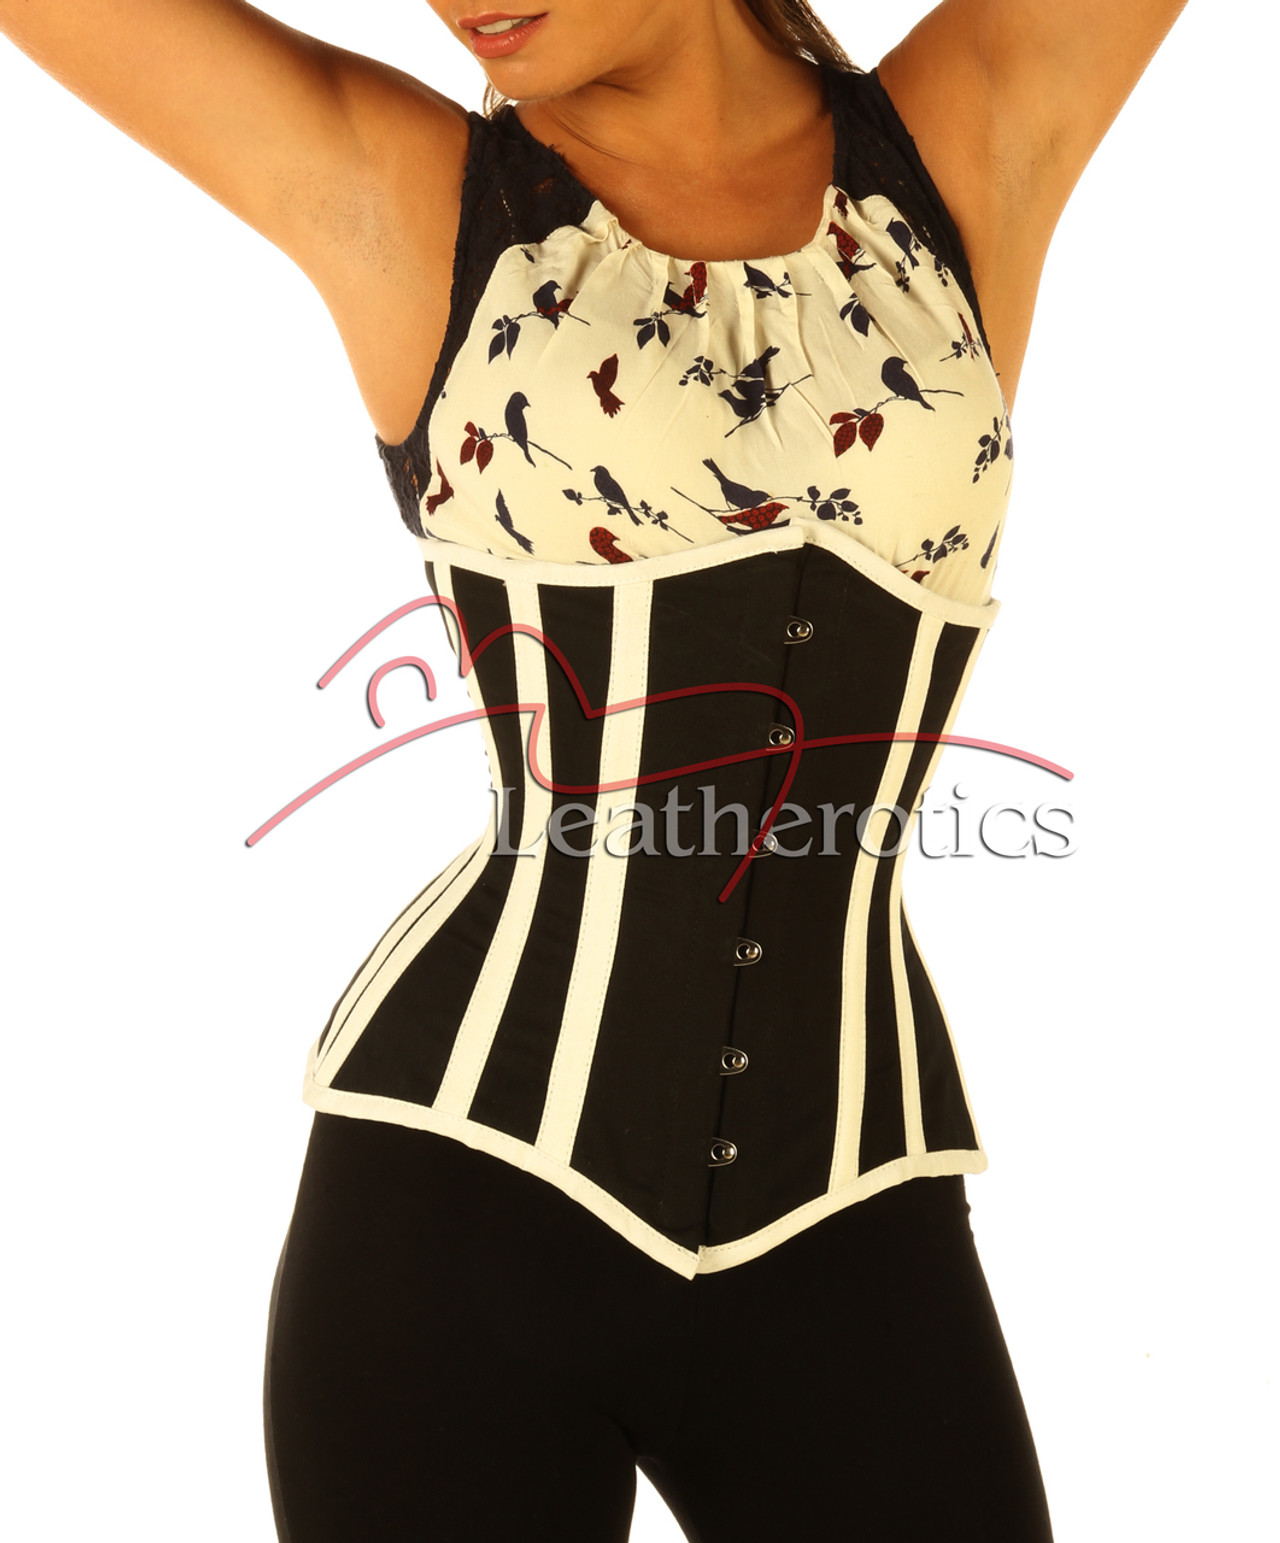 https://cdn11.bigcommerce.com/s-0d59c/images/stencil/1280x2500/products/348/2486/Full-Steel-Boned-Corset-1836-front2__72217.1664202755.jpg?c=2?imbypass=on